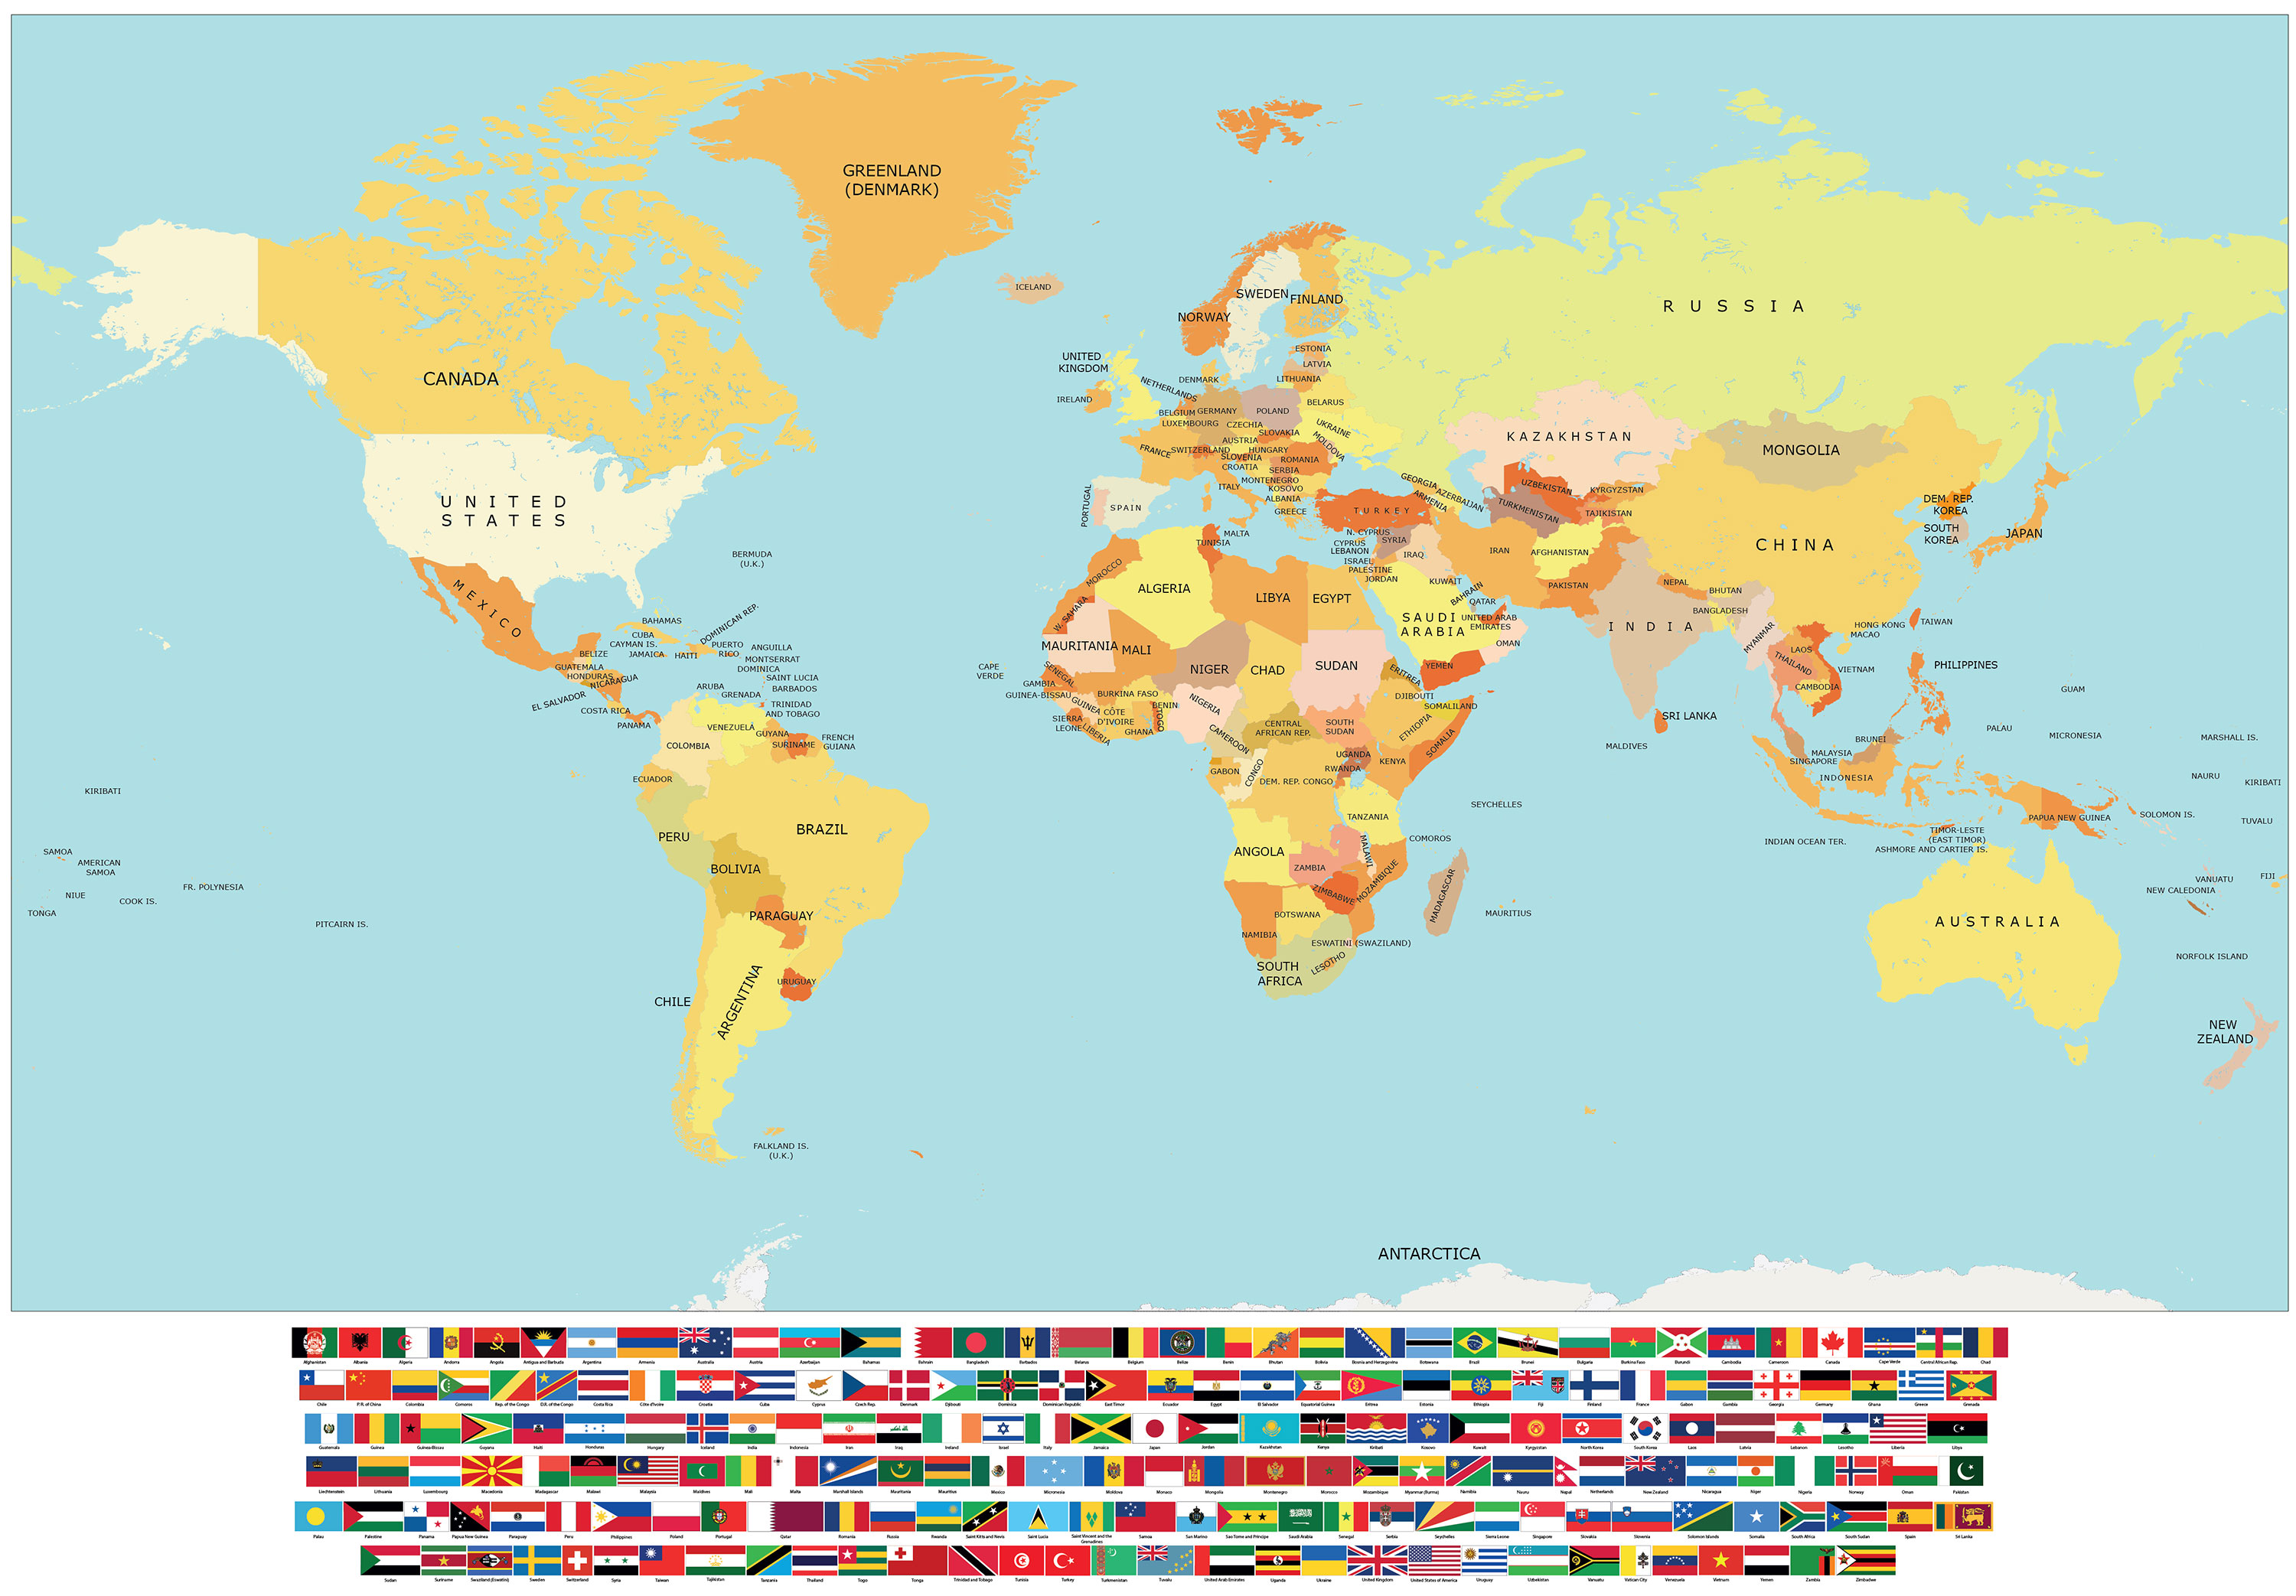 world flags map